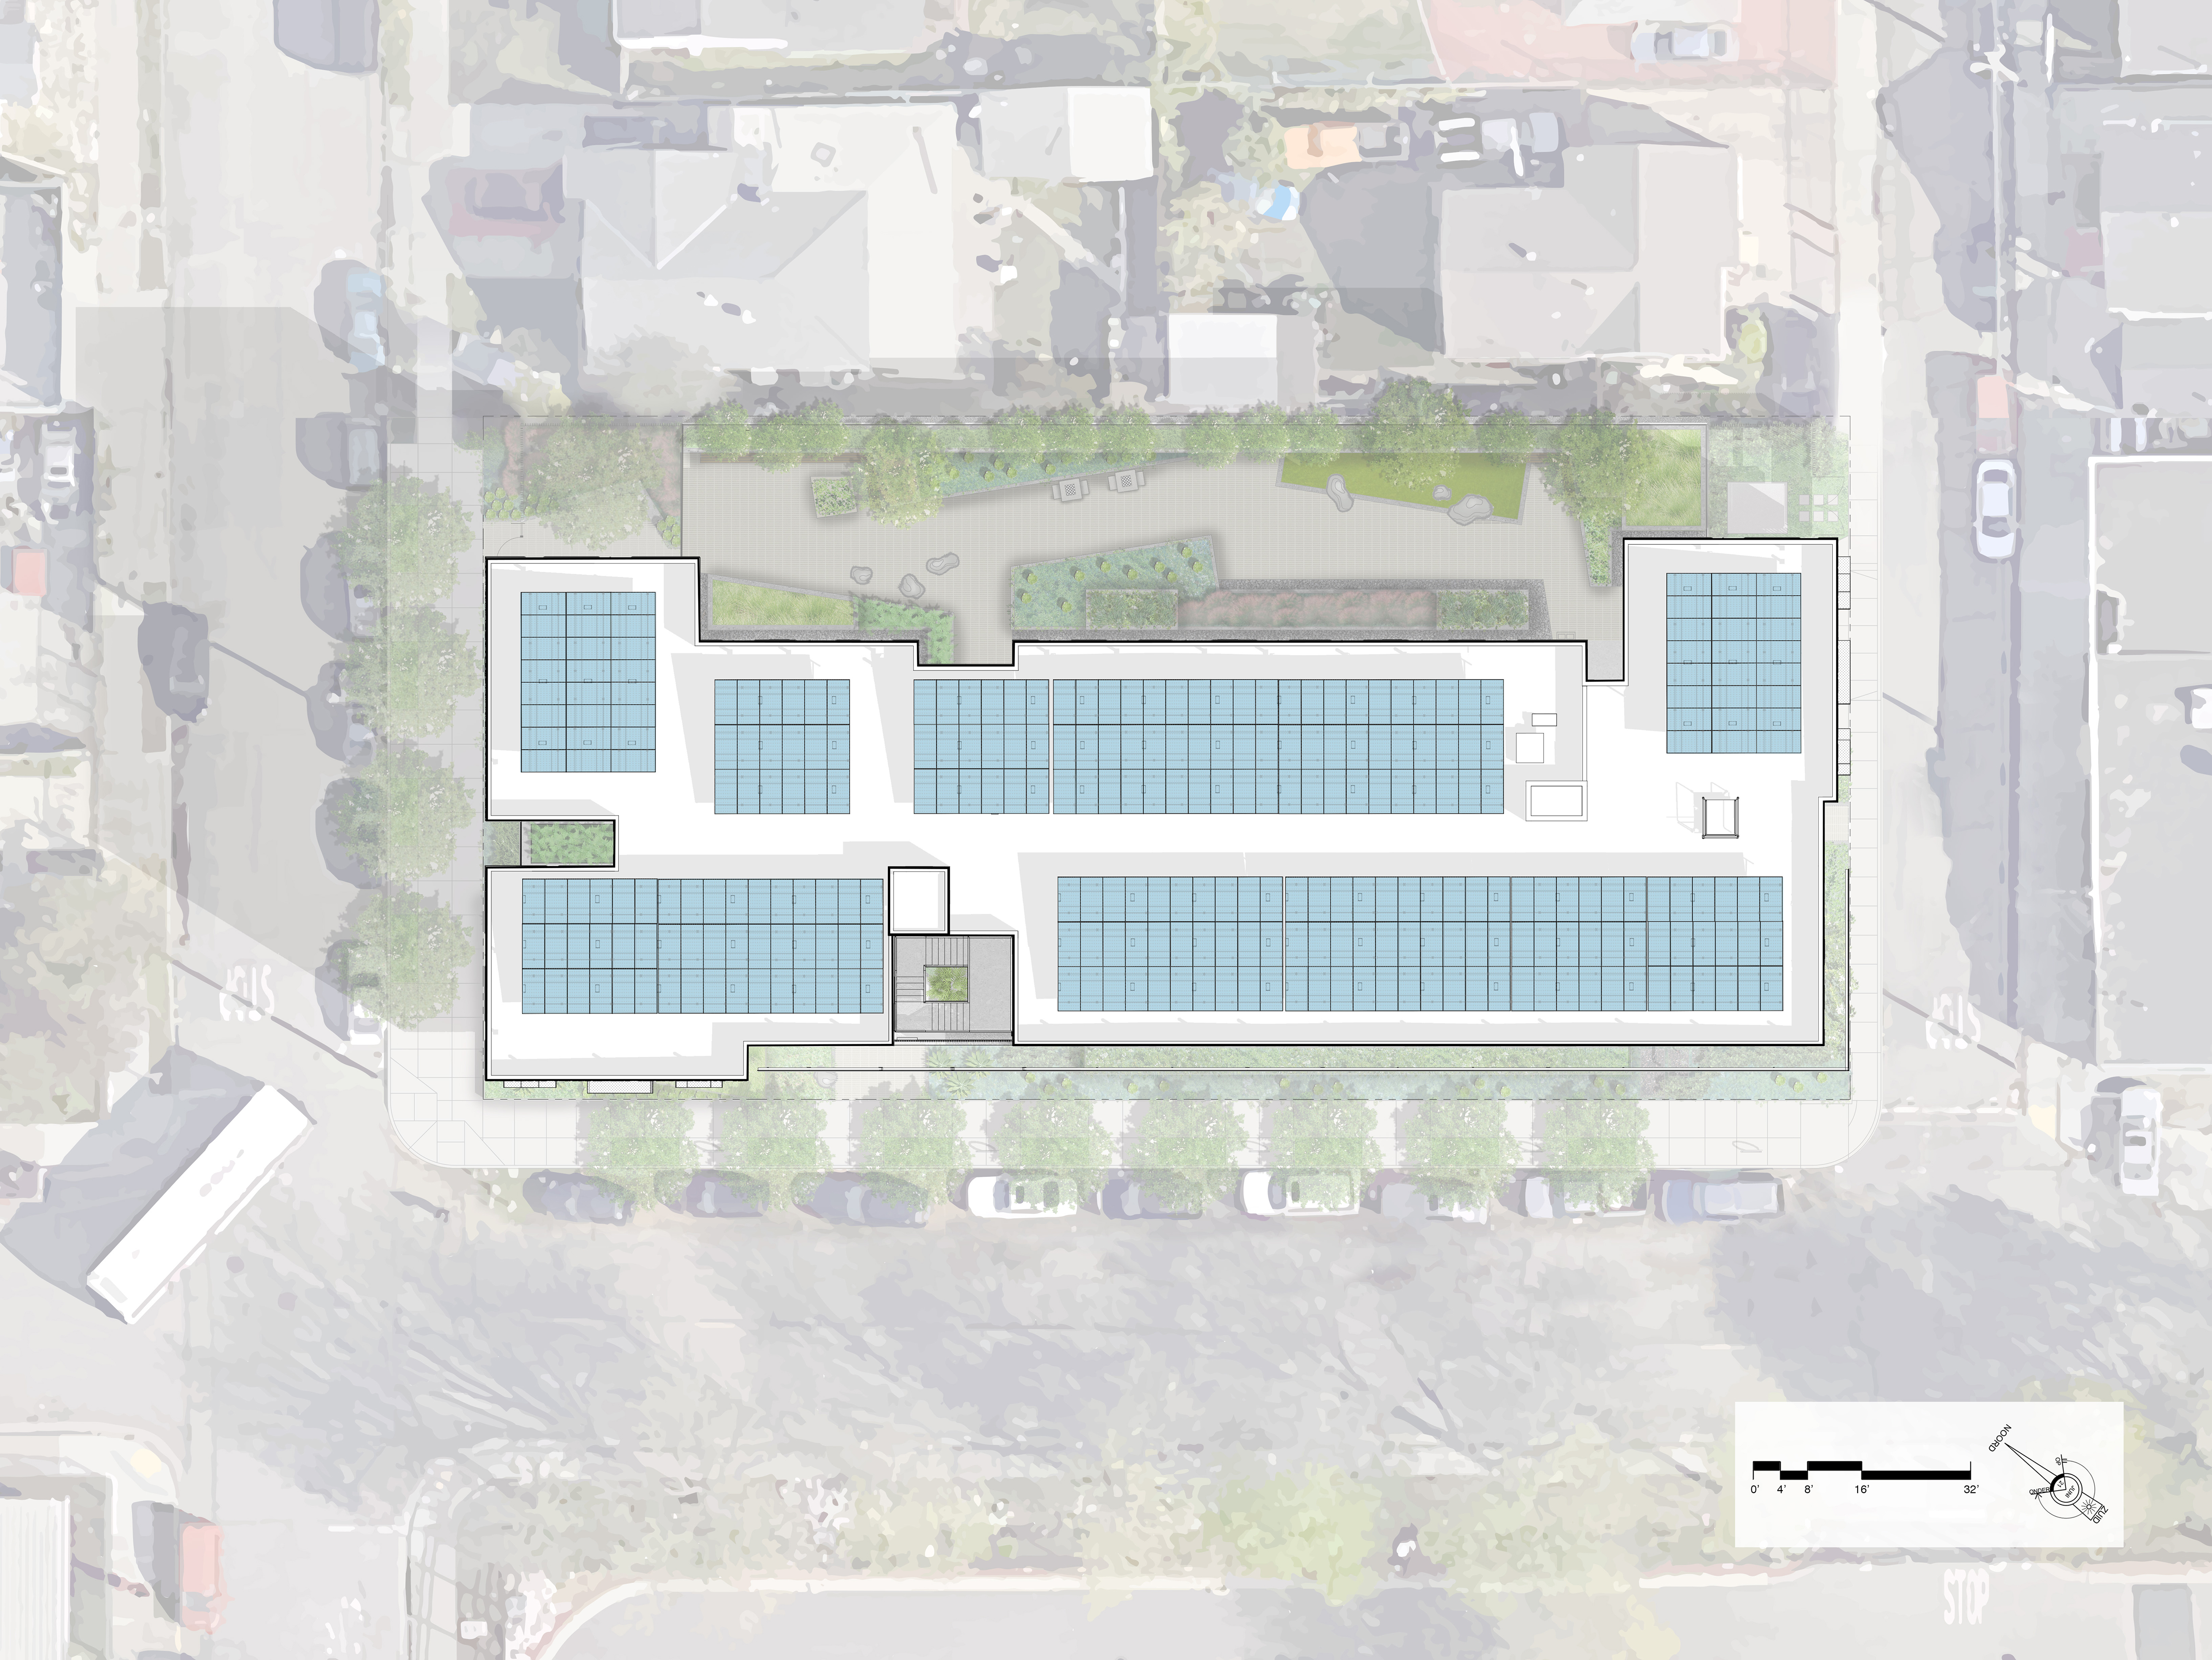 Roof level site plan for Coliseum Place, affordable housing in Oakland, Ca